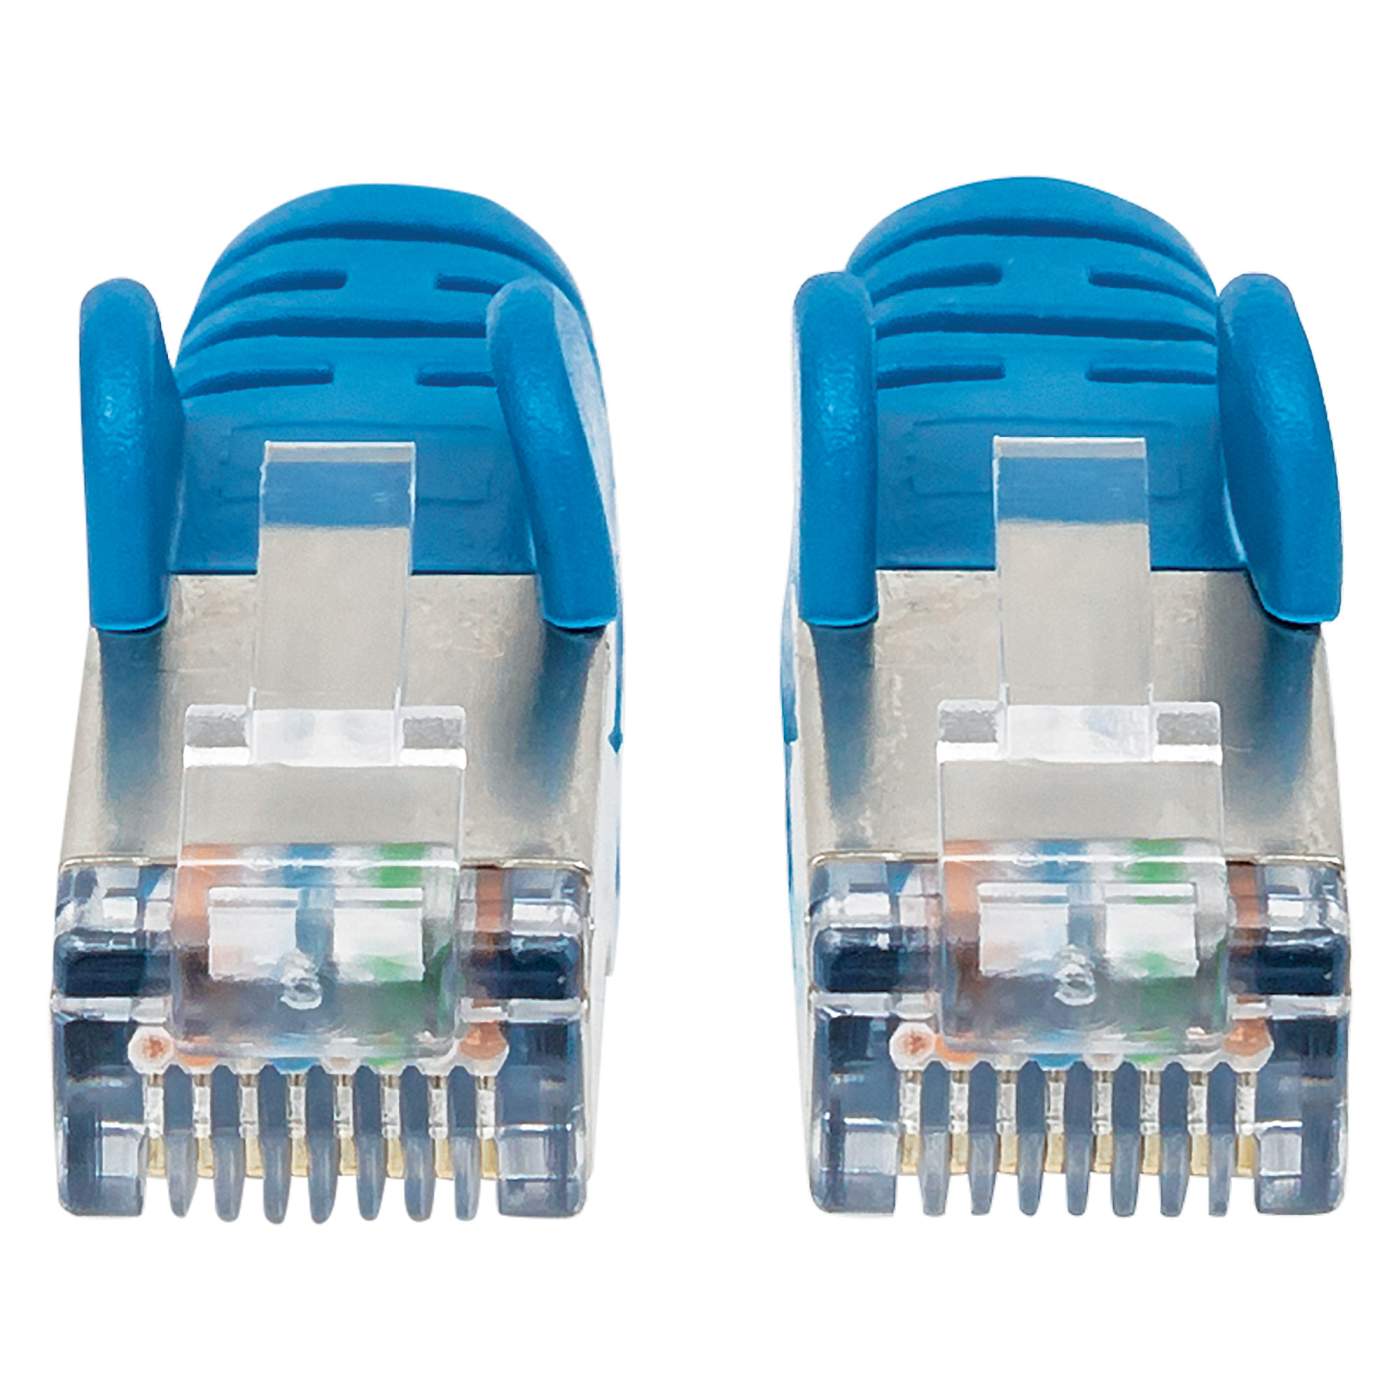 Cat6A Shielded Patch Cable, RJ45 to RJ45, 6 FT. Blue